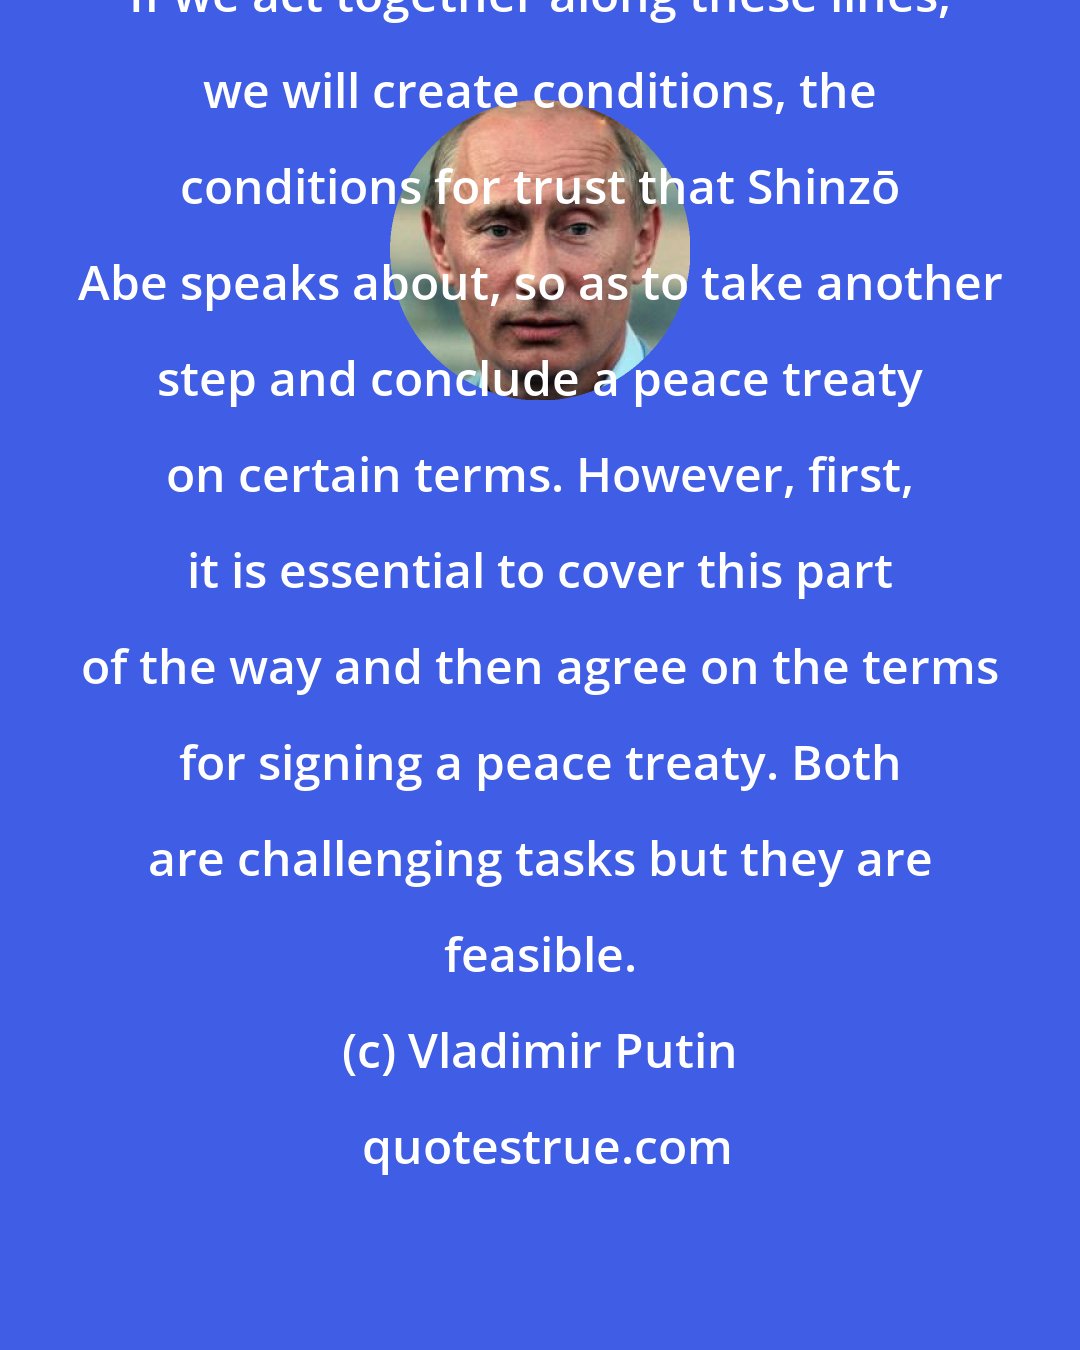 Vladimir Putin: If we act together along these lines, we will create conditions, the conditions for trust that Shinzō Abe speaks about, so as to take another step and conclude a peace treaty on certain terms. However, first, it is essential to cover this part of the way and then agree on the terms for signing a peace treaty. Both are challenging tasks but they are feasible.